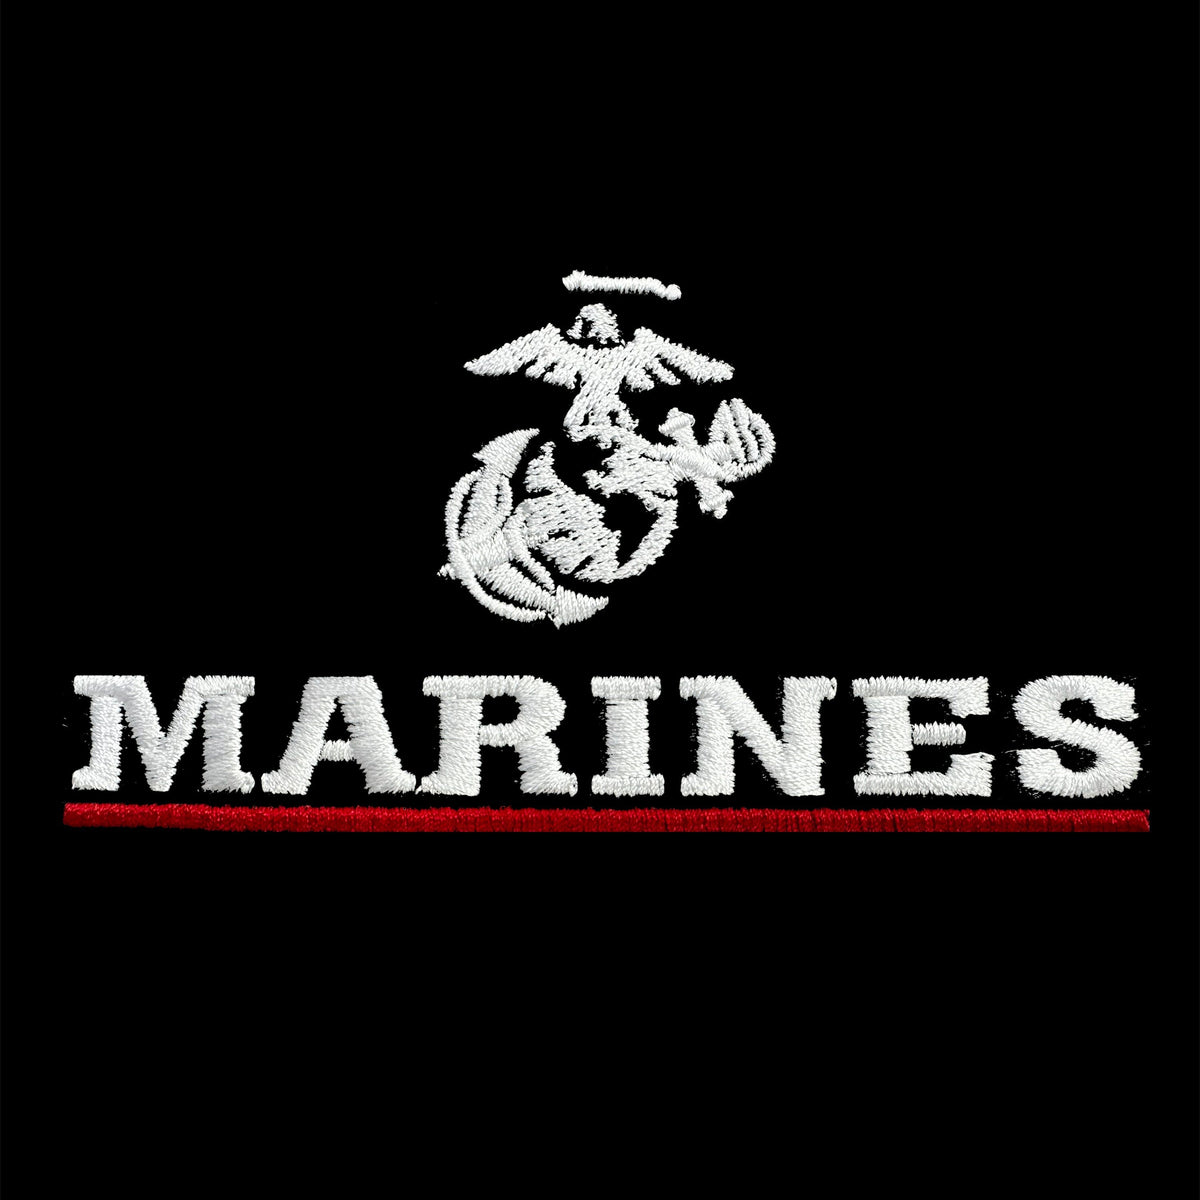 Marines Red Line Embroidered lightweight Performance 1/4th Zip Pullover